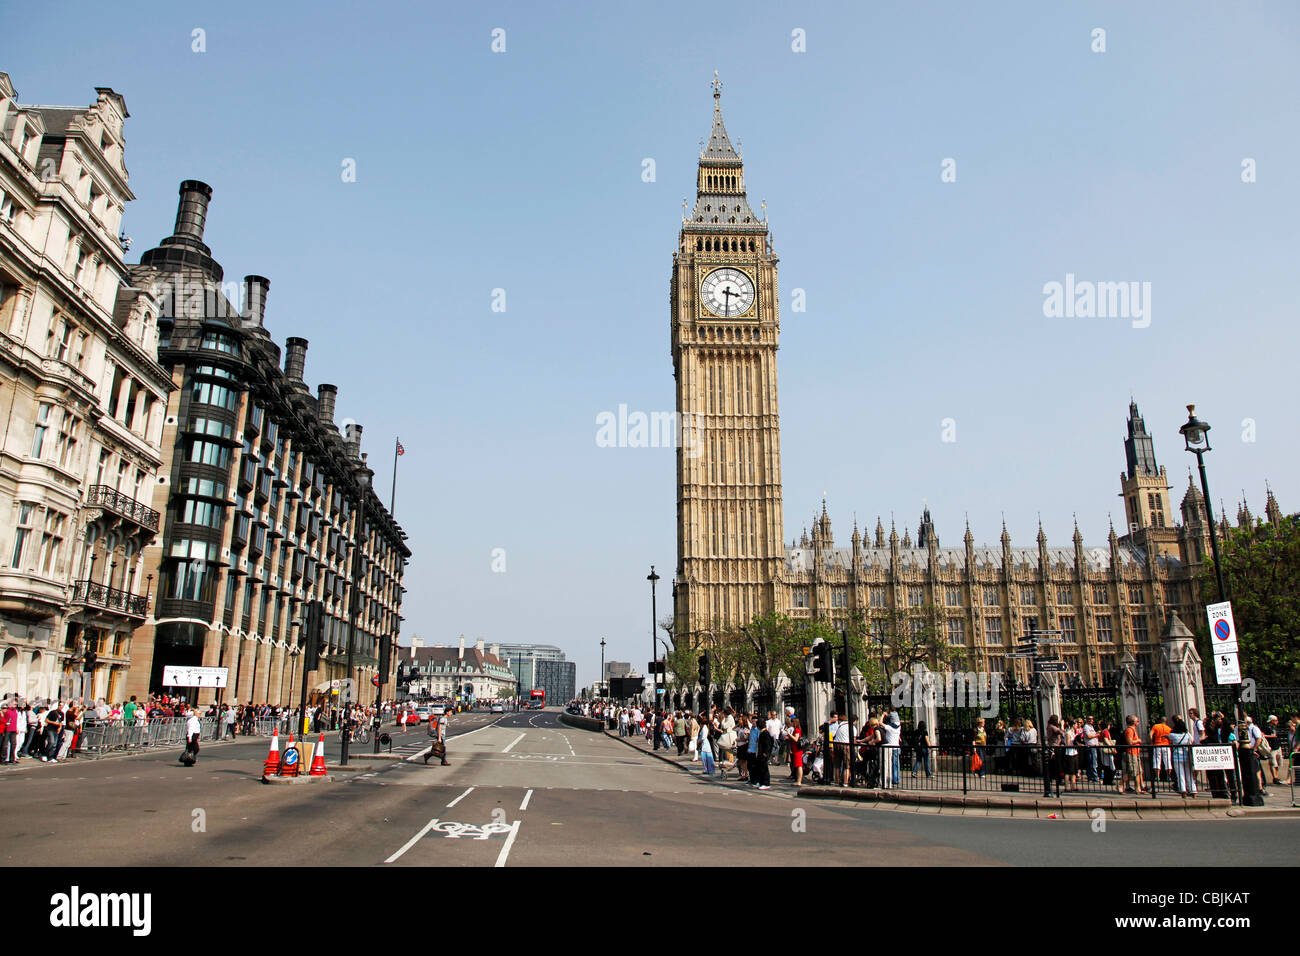 Big Ben and the Houses of Parliament in Parliament Square, London, England Stock Photo